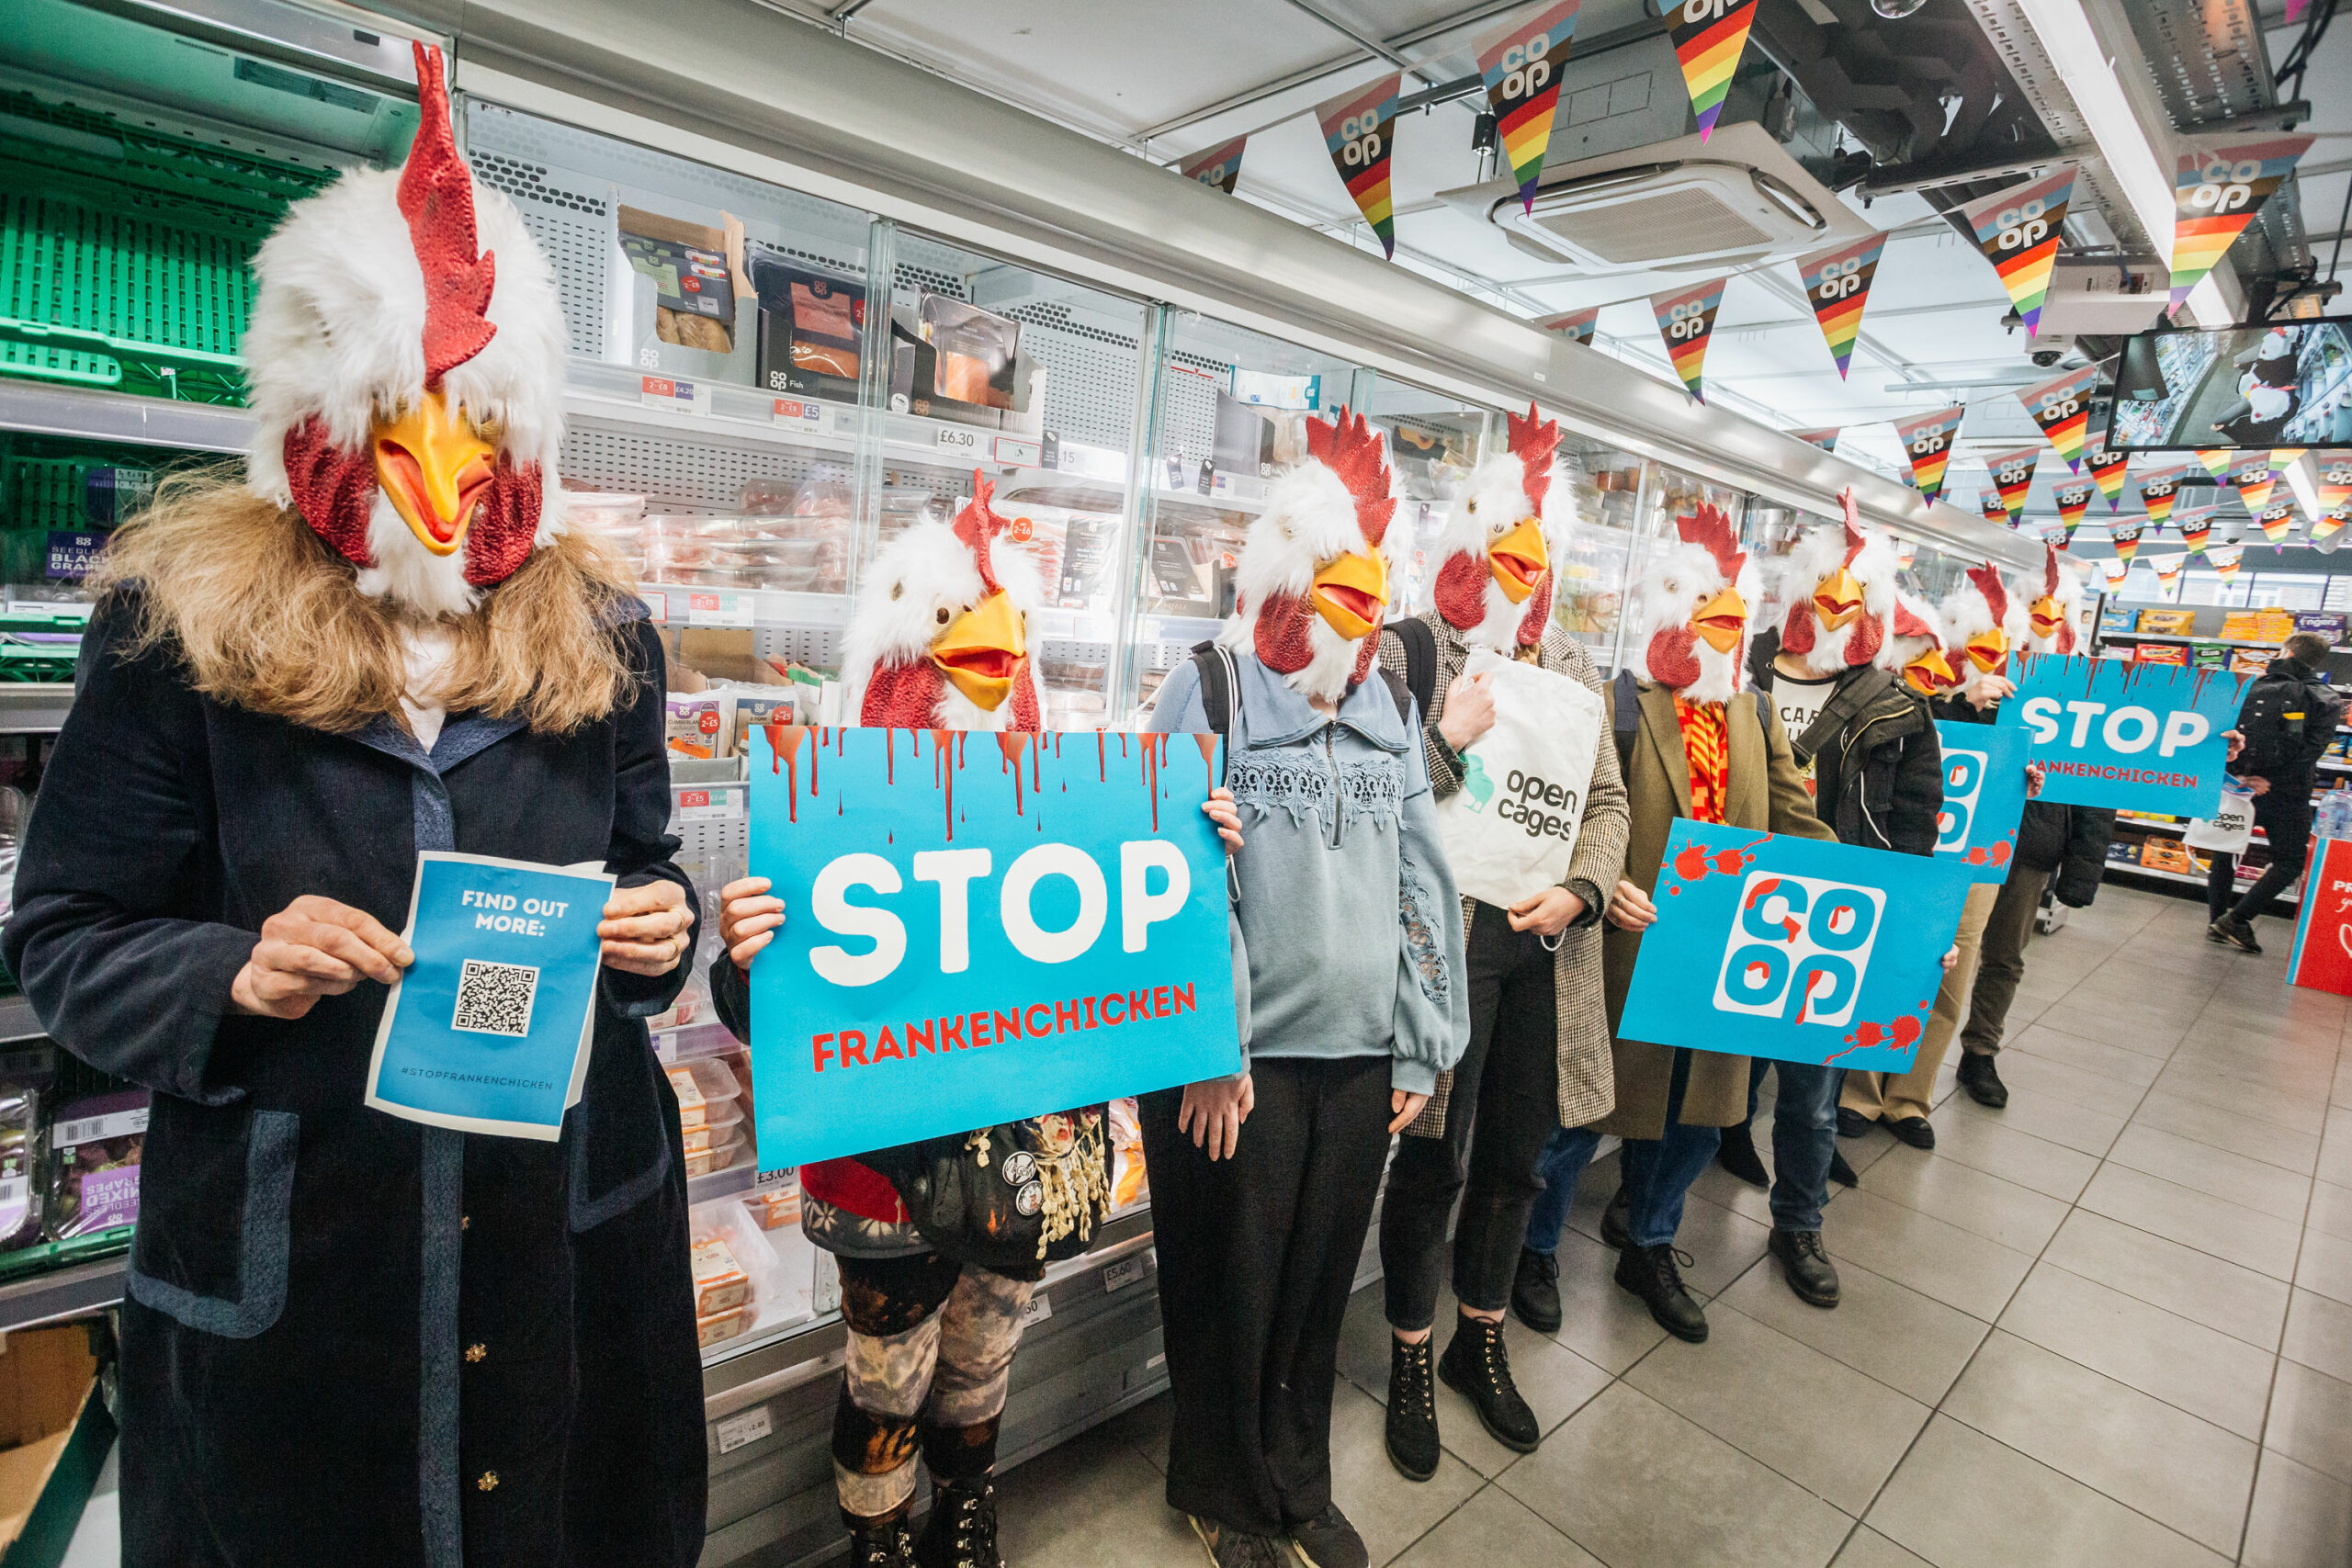 Activists Shut Down Co-op Chicken Aisle Over Sale Of ‘Frankenchickens’